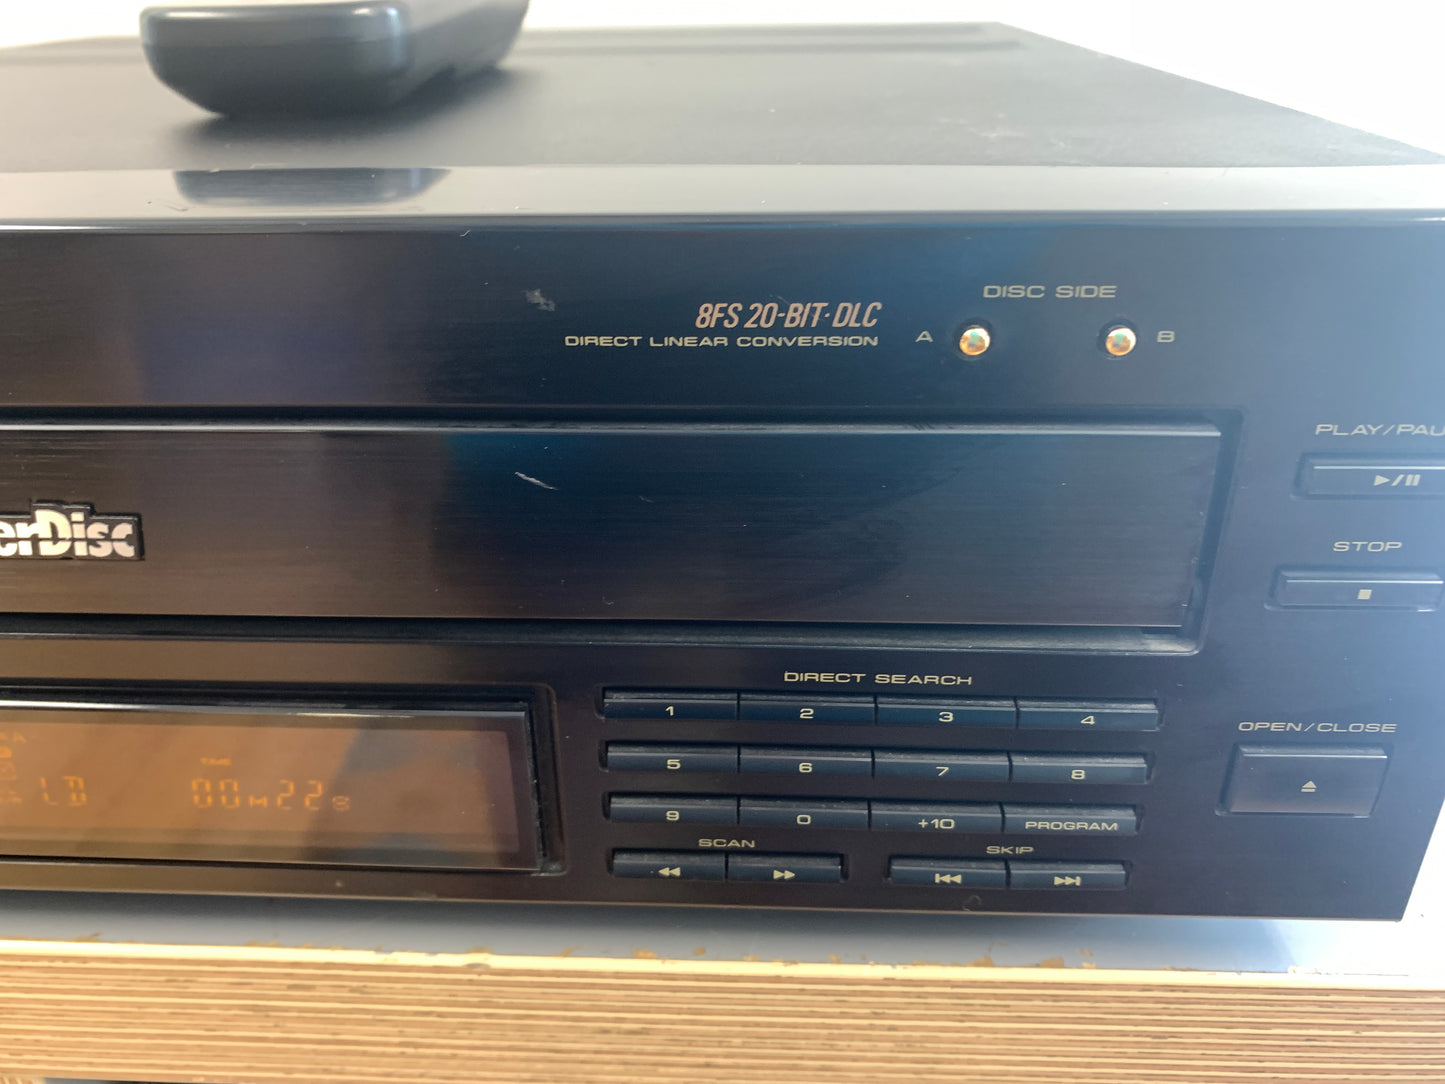 Pioneer CLD-2080 Laserdisc/CD Player * Remote Control